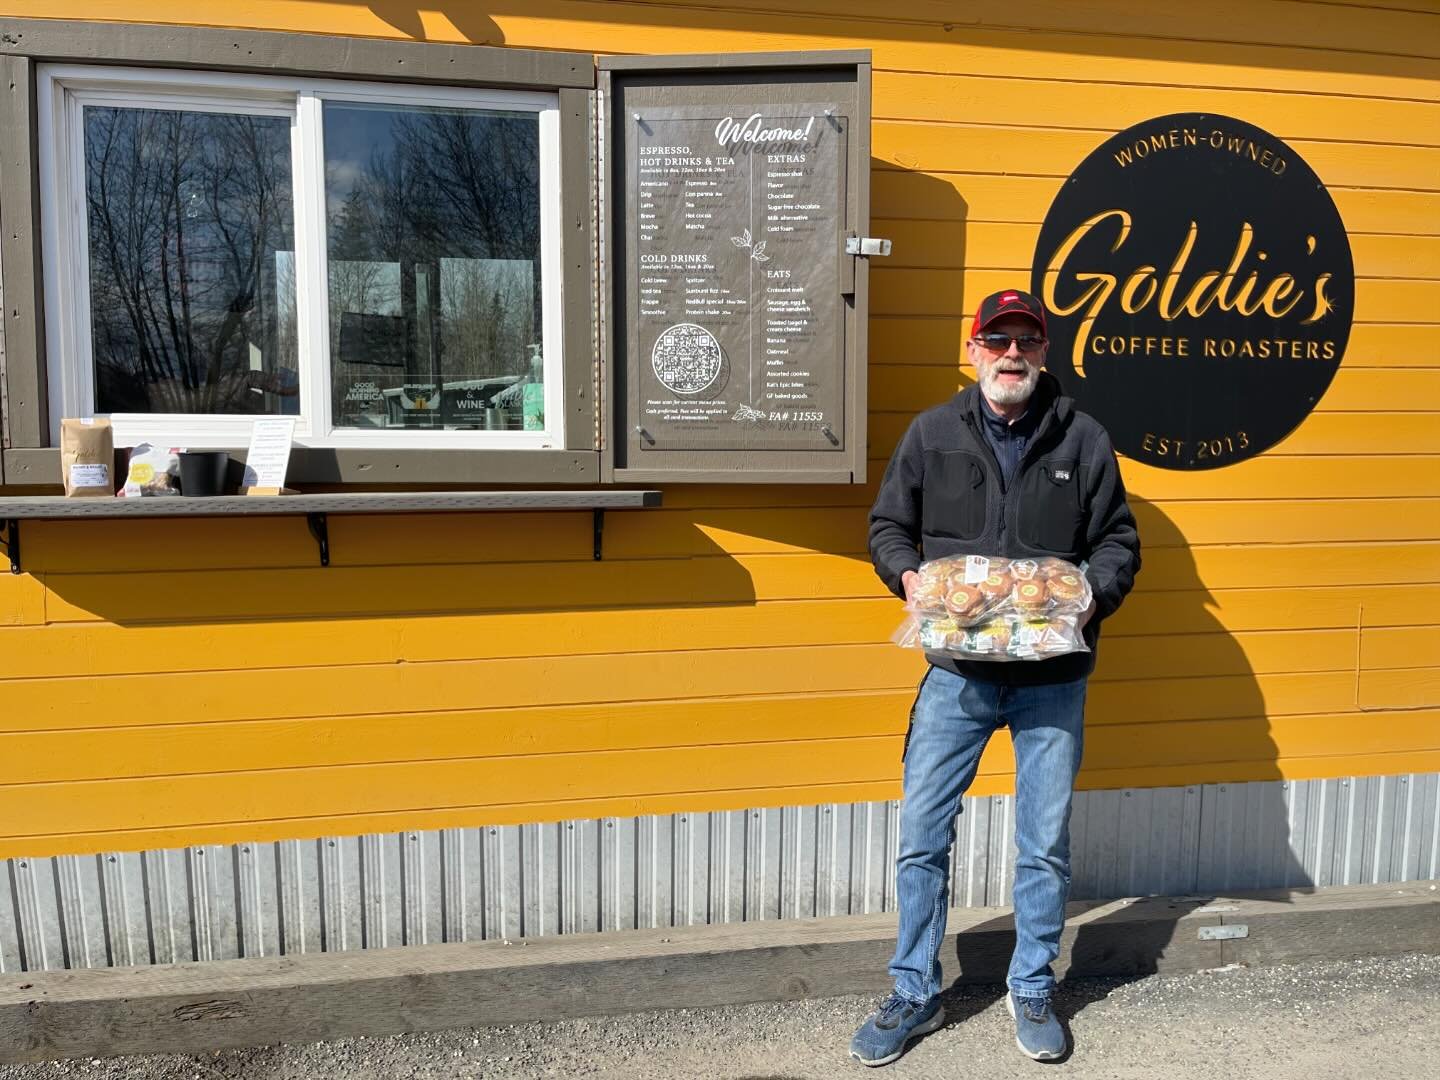 Our Lucy&rsquo;s courier restocking breakfast cookies &amp; poppy seed muffins 🚗☀️🍪 #glutenfree #peninsuladelivery #supportsmall #alaska #goldiescoffeeroasters #pops